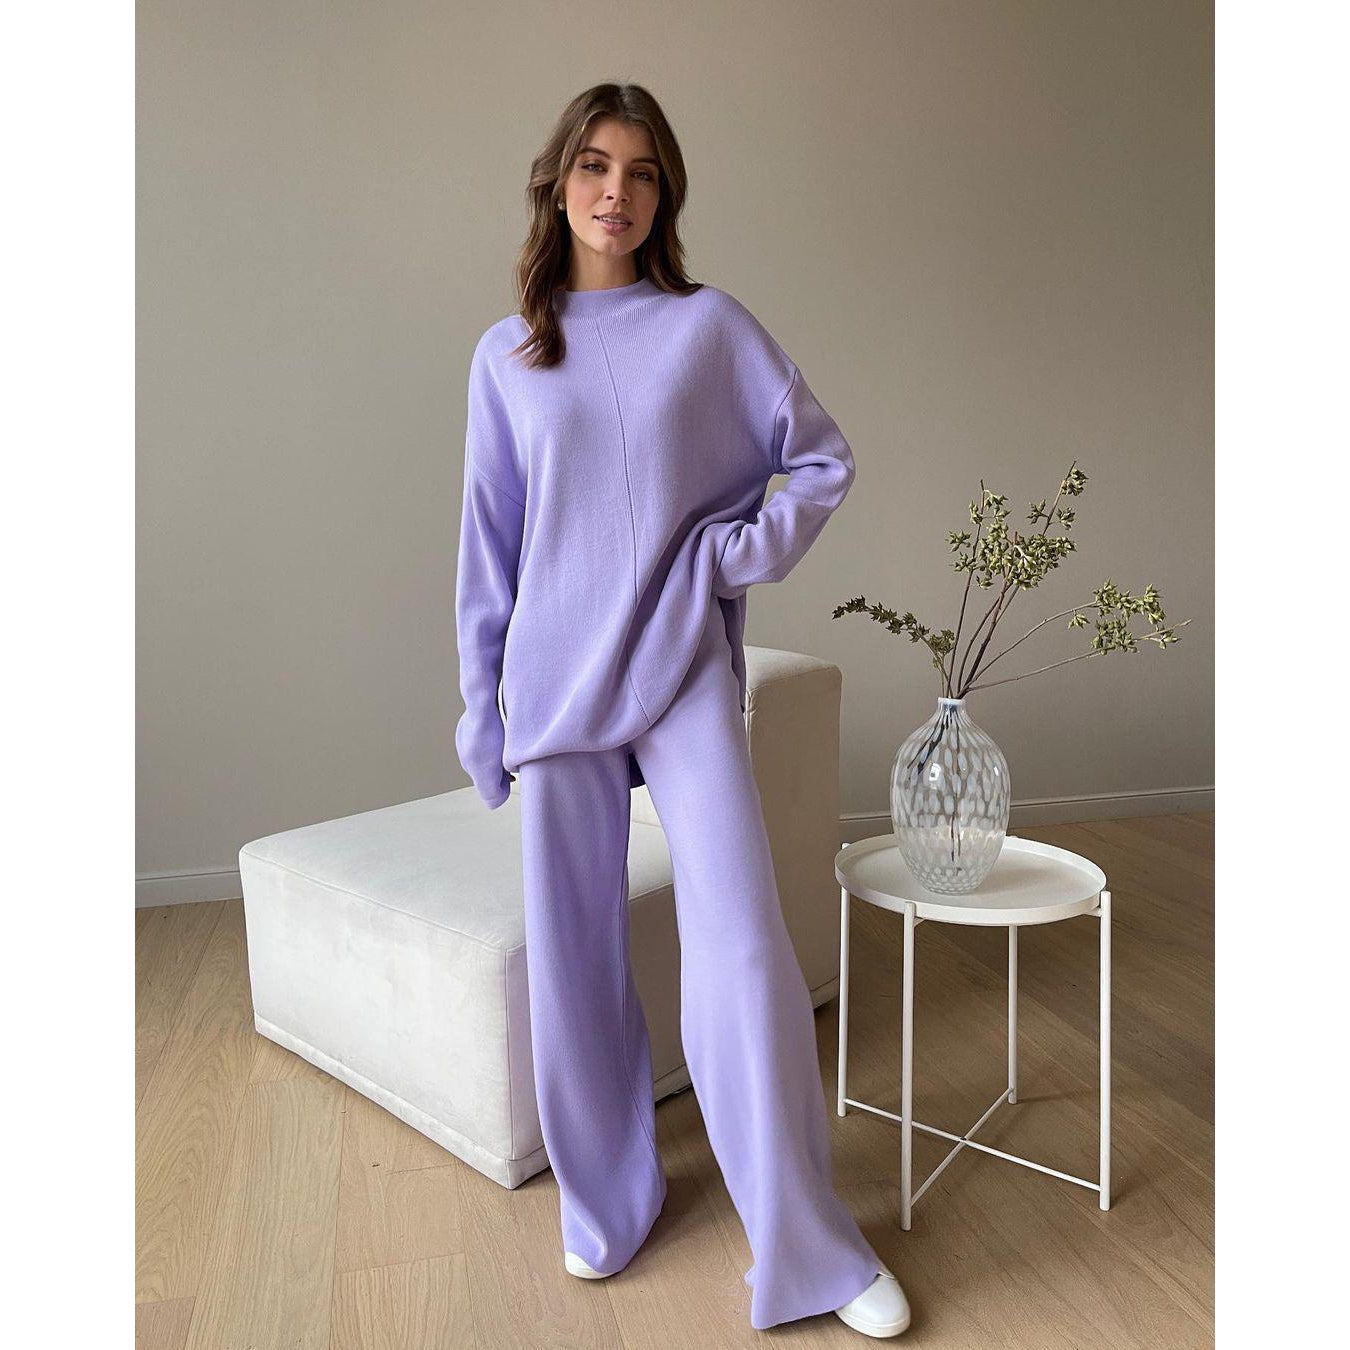 GX0021 fashion autumn winter long sleeve loose casual knitted sweater tops and trousers suit 2 piece set women clothing